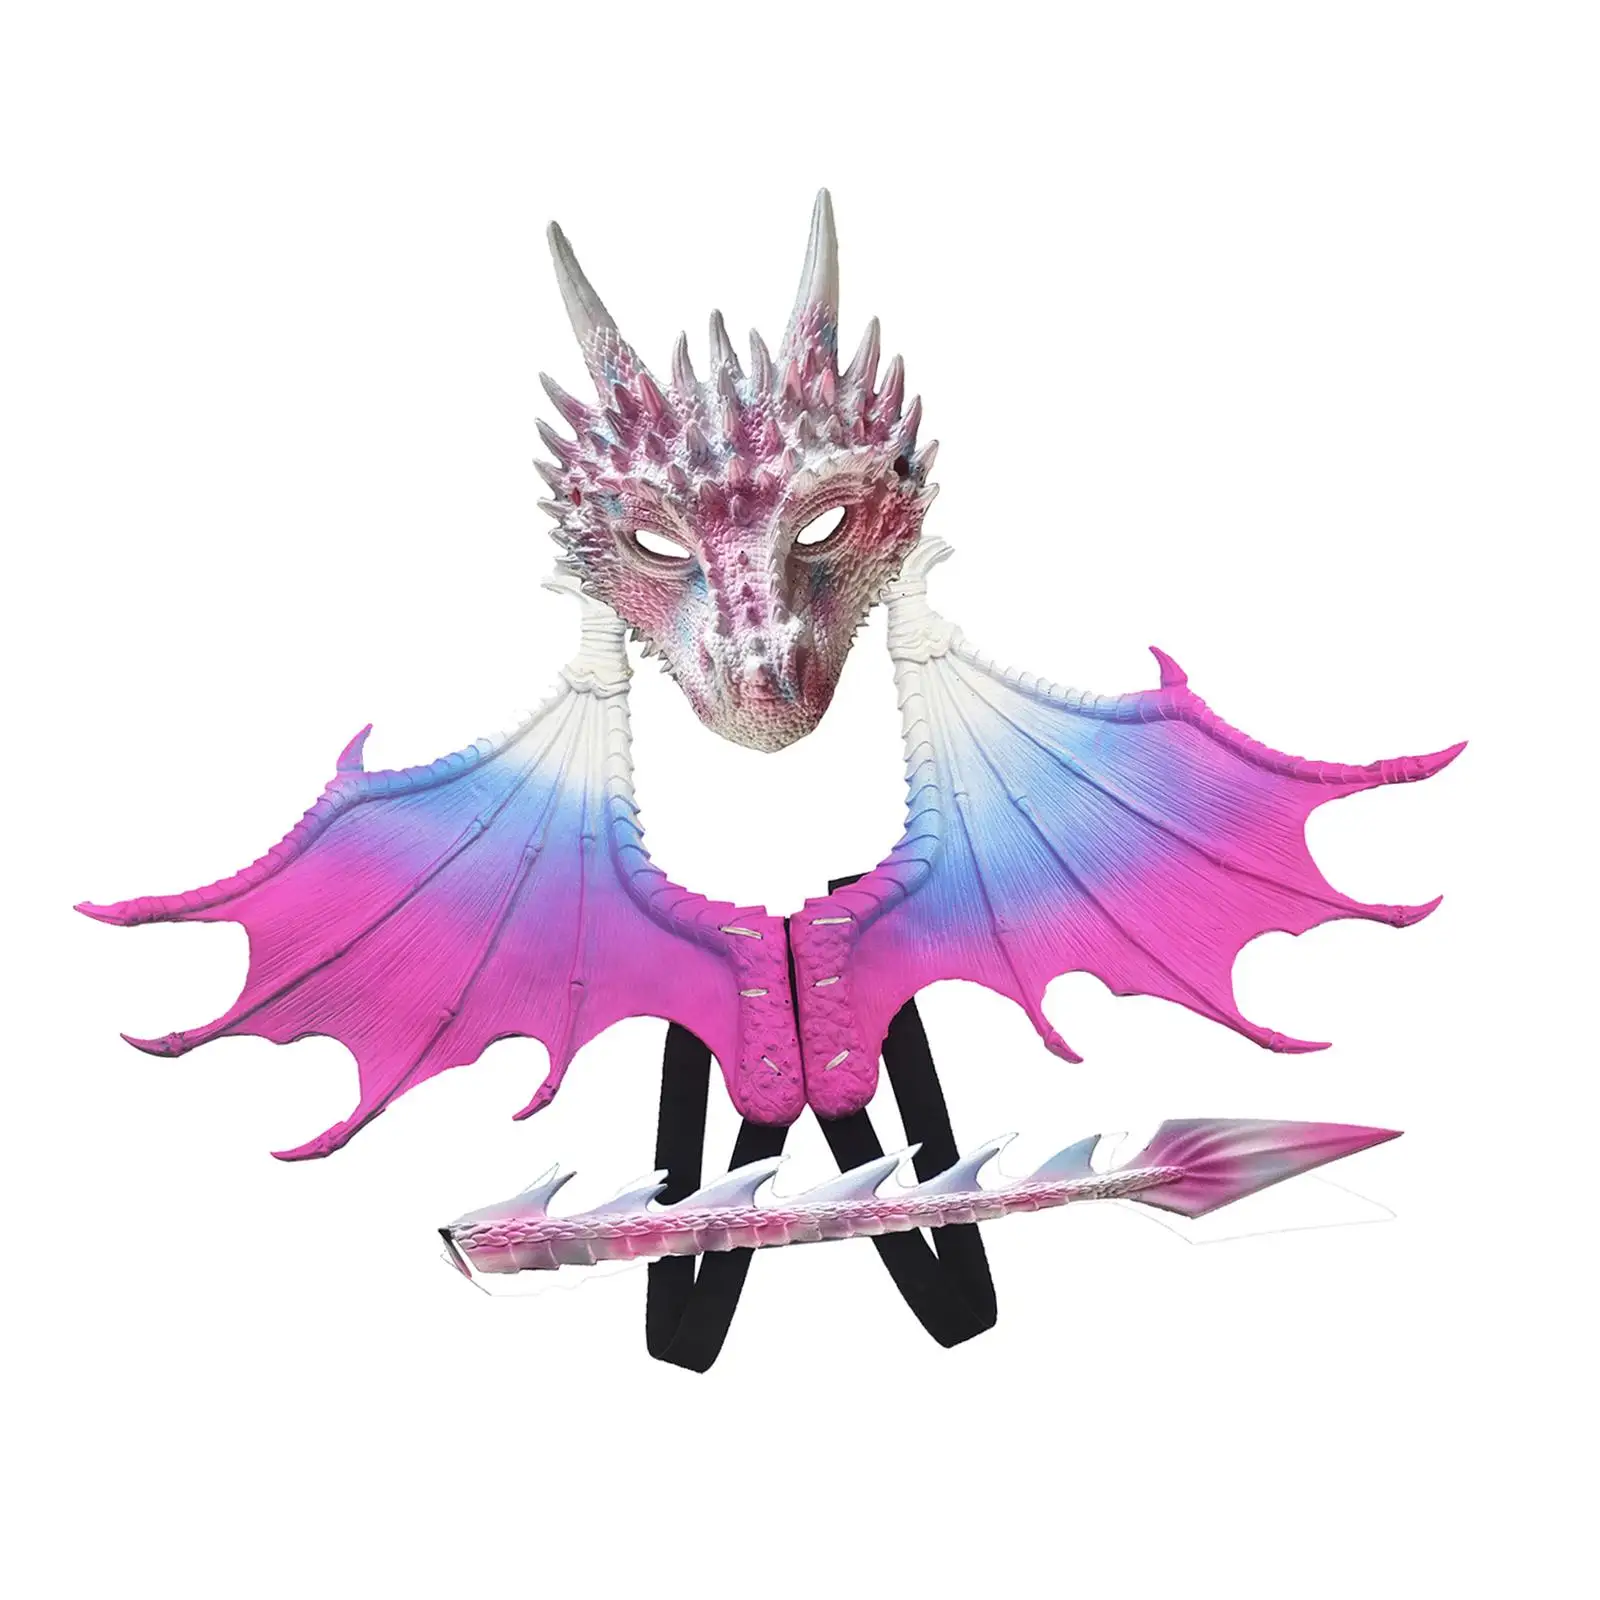 Kids Dragon Costume Dinosaur Wing Tail Mask Set Gift Toy Halloween Cosplay for Festivals Stage Performance Nightclub Boys Girls